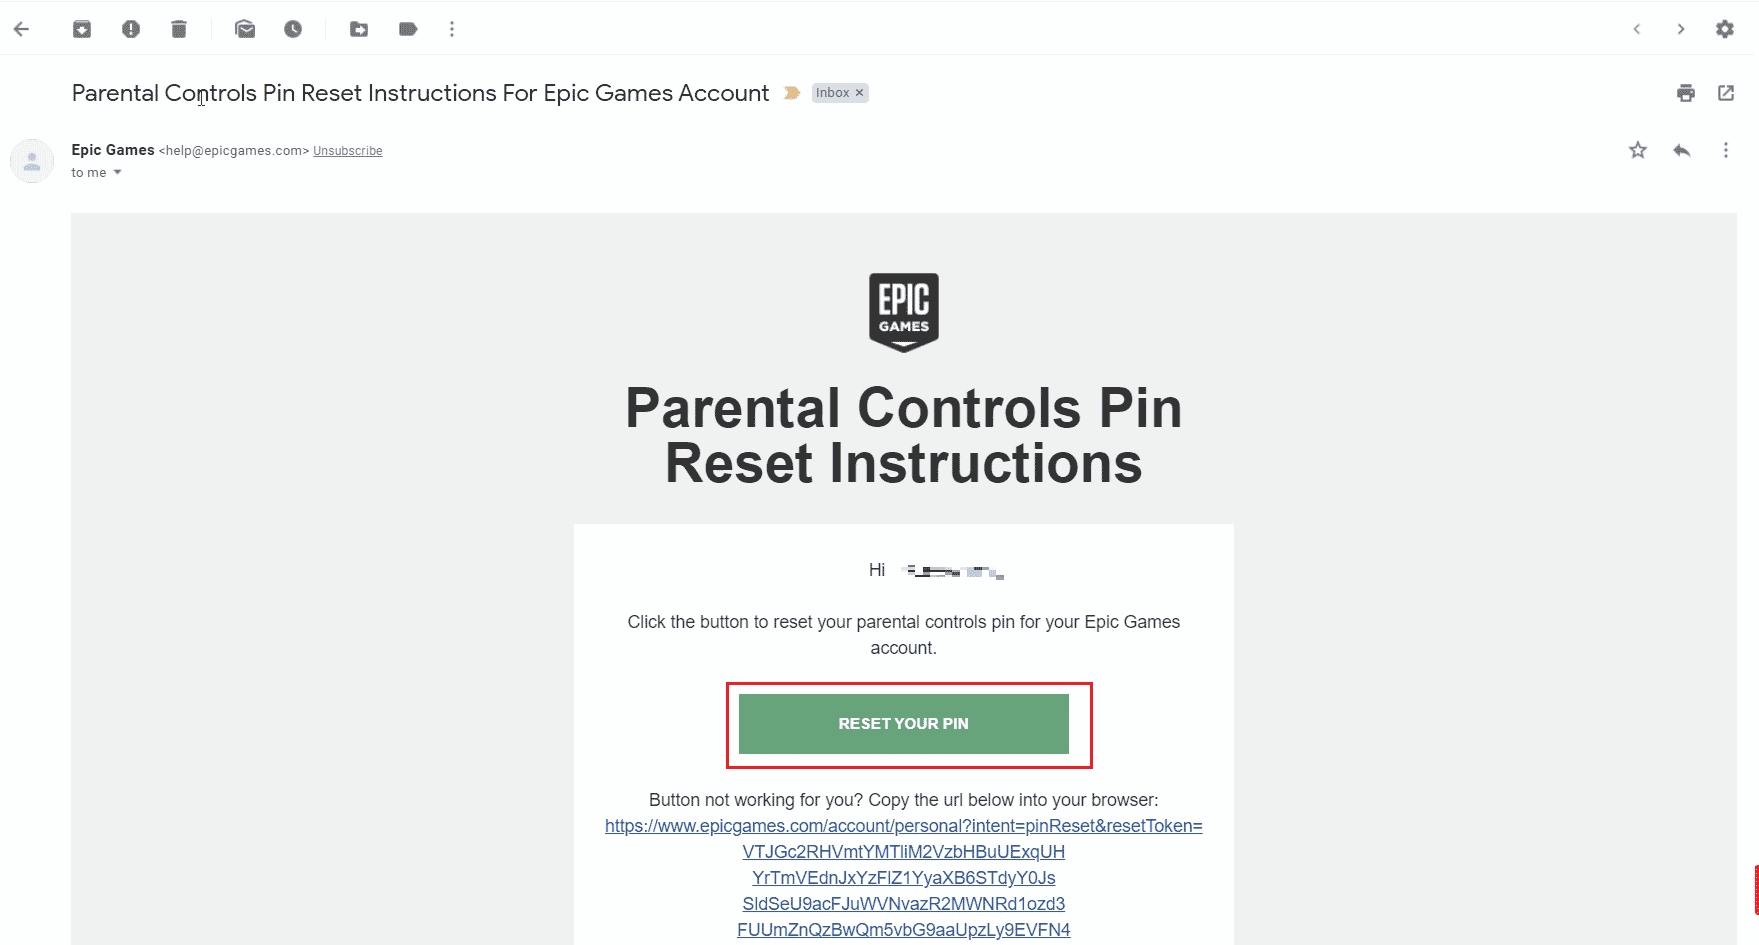 Open the mail and tap on RESET YOUR PIN sent to the registered email